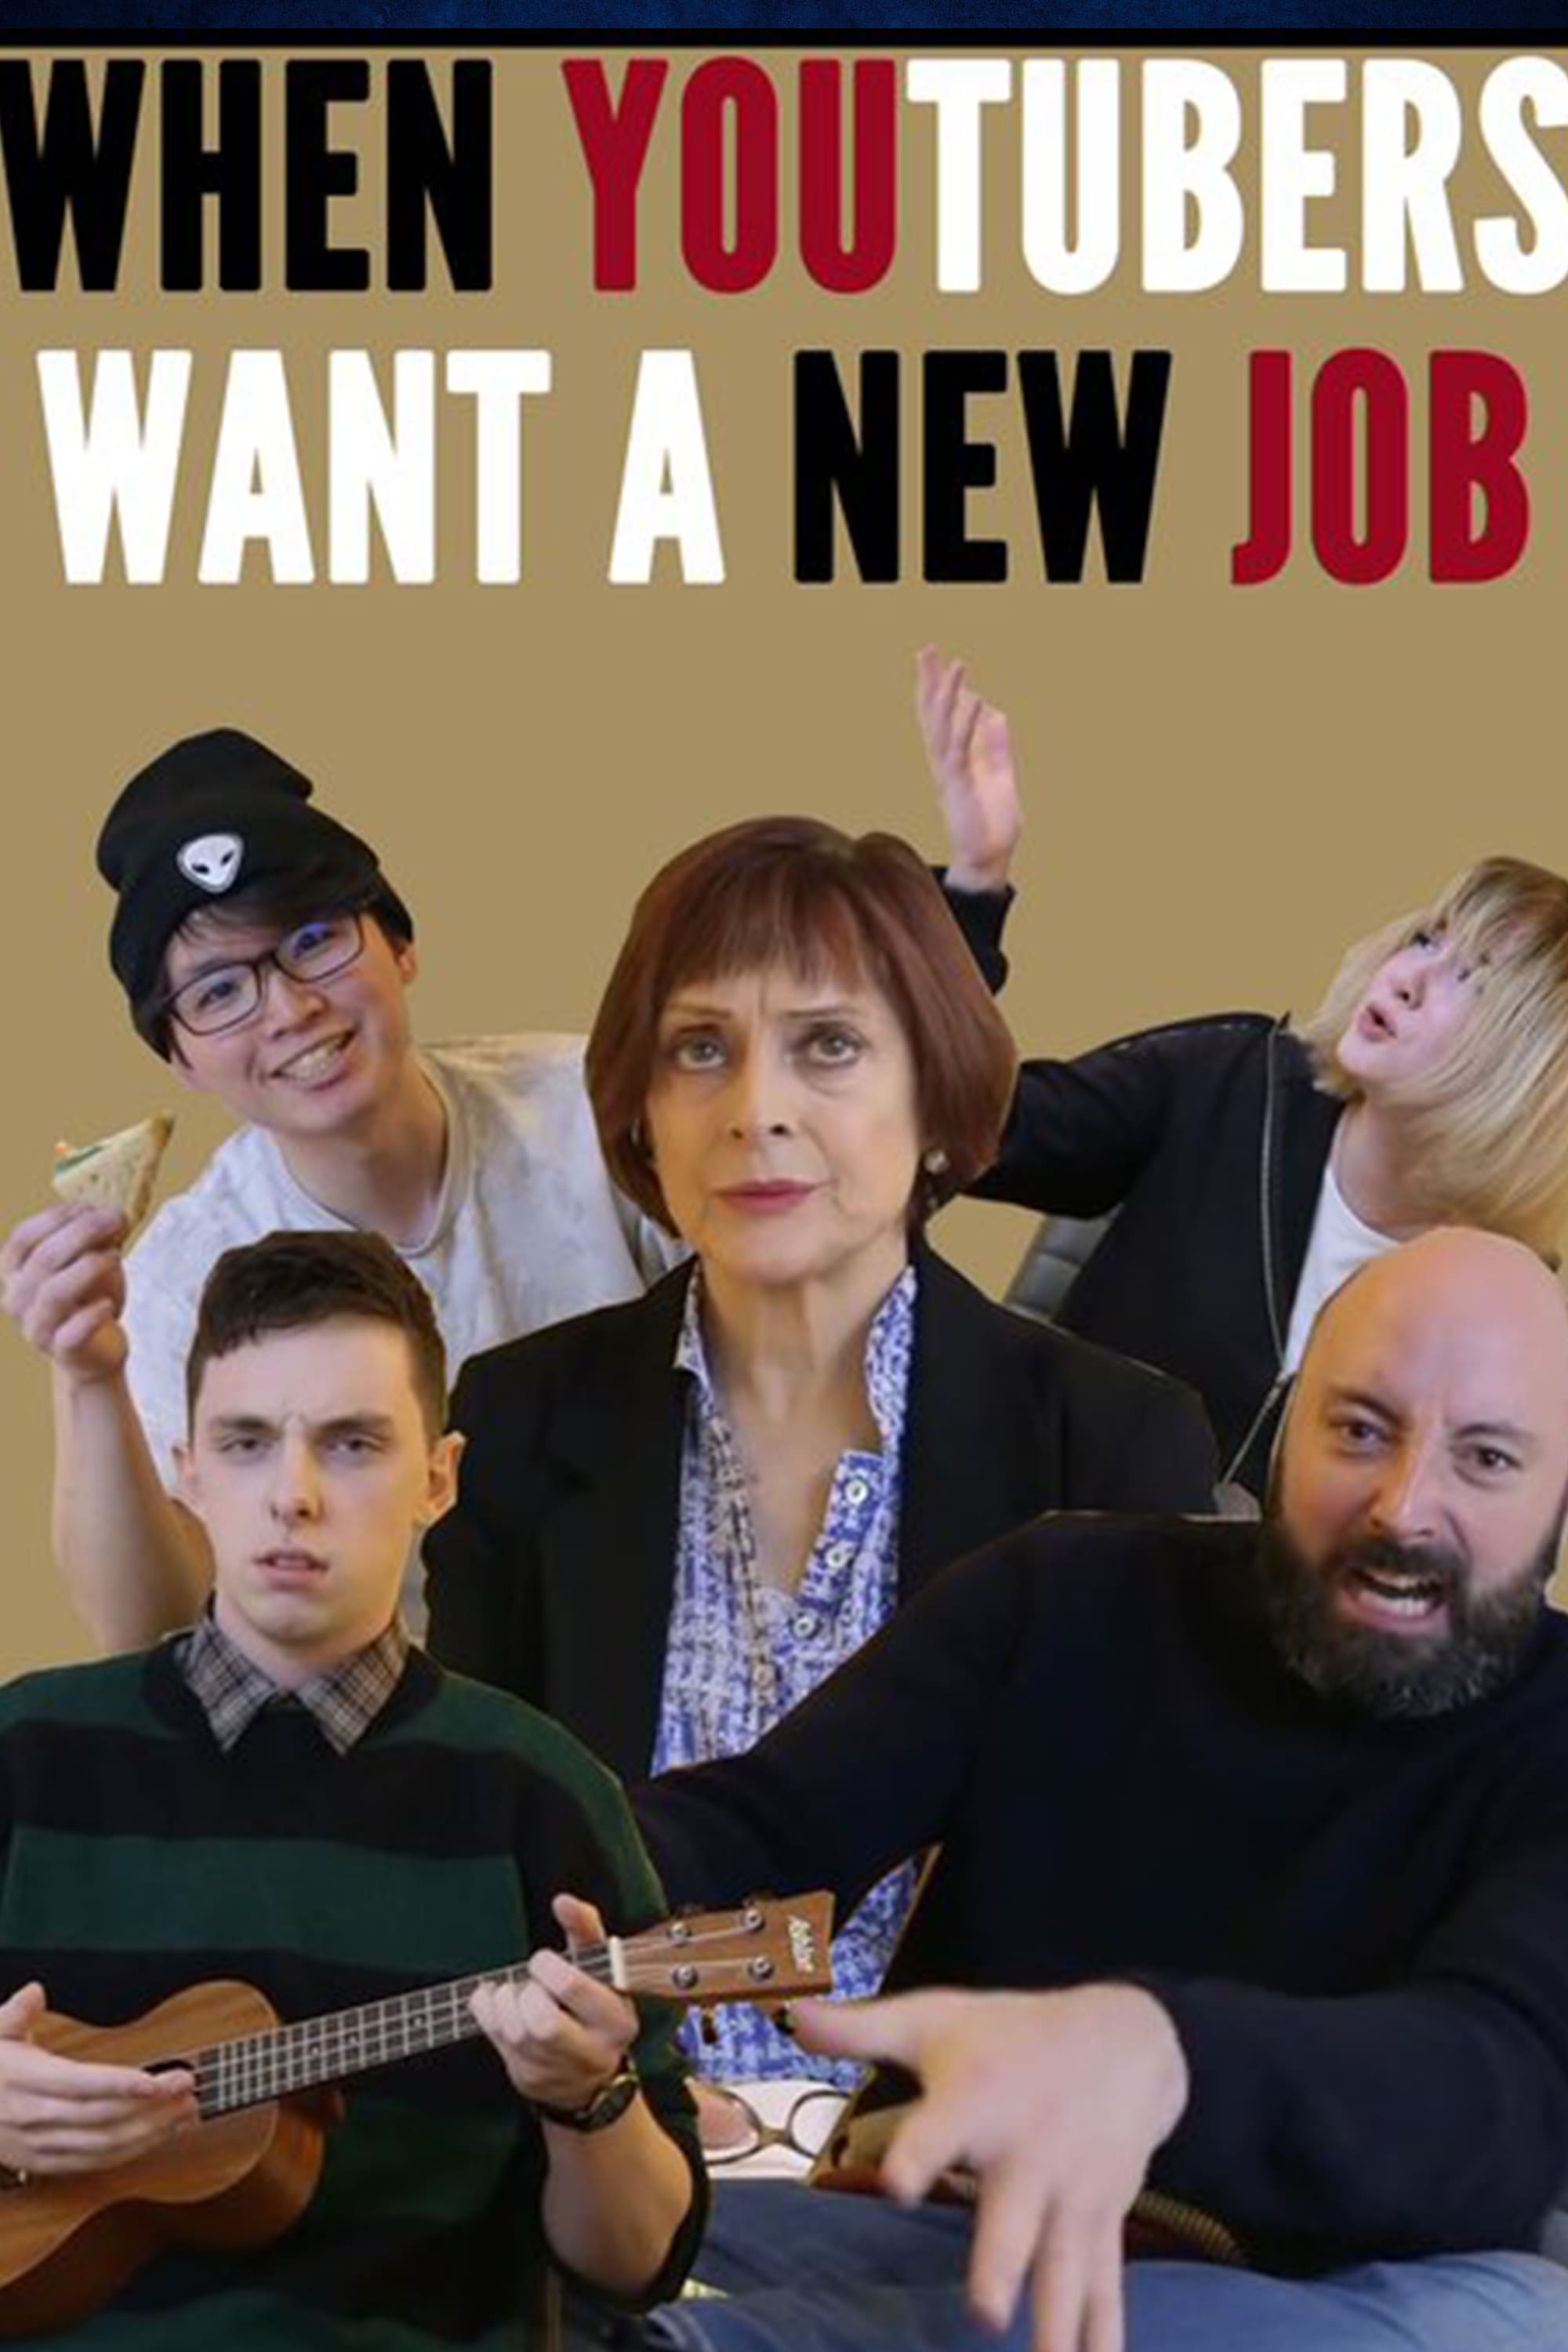 When YouTubers want a new job...